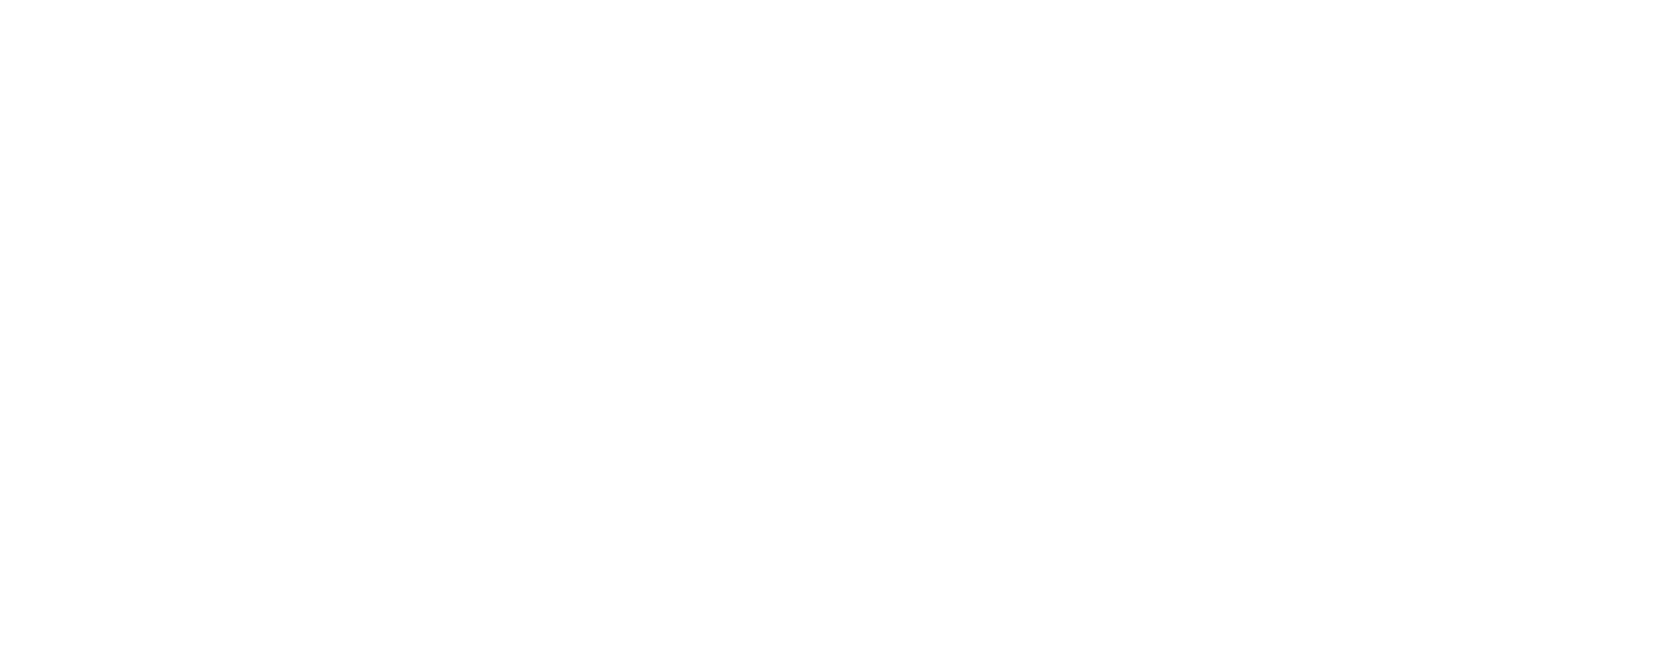 OFFICIAL HIGE DAANDISM ONE-MAN TOUR 2021-2022『Editorial』